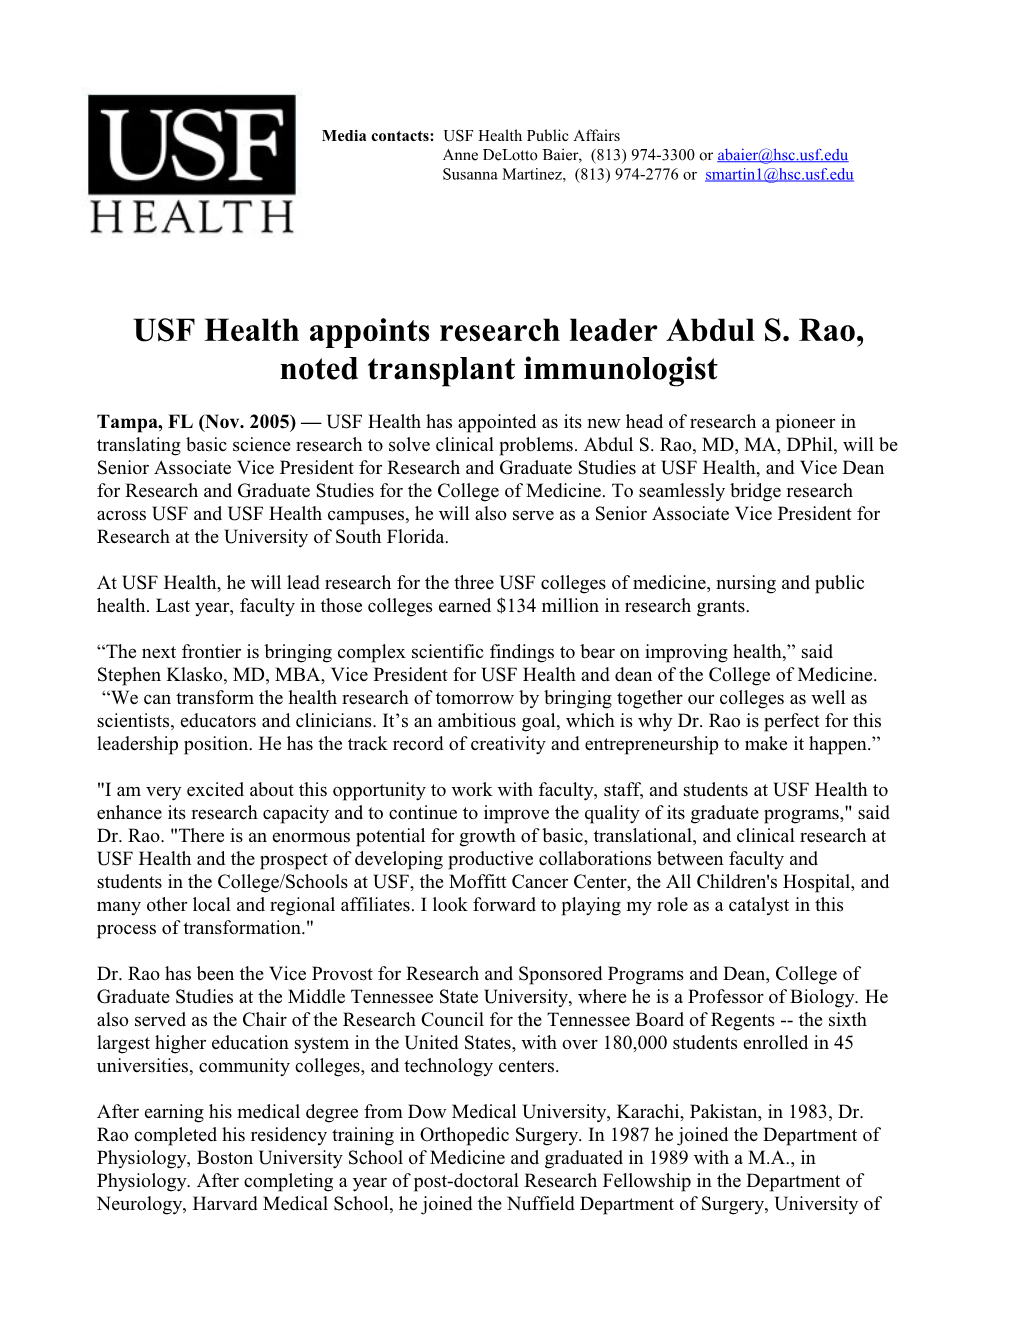 USF Health Appoints Research Leader Abdul S. Rao